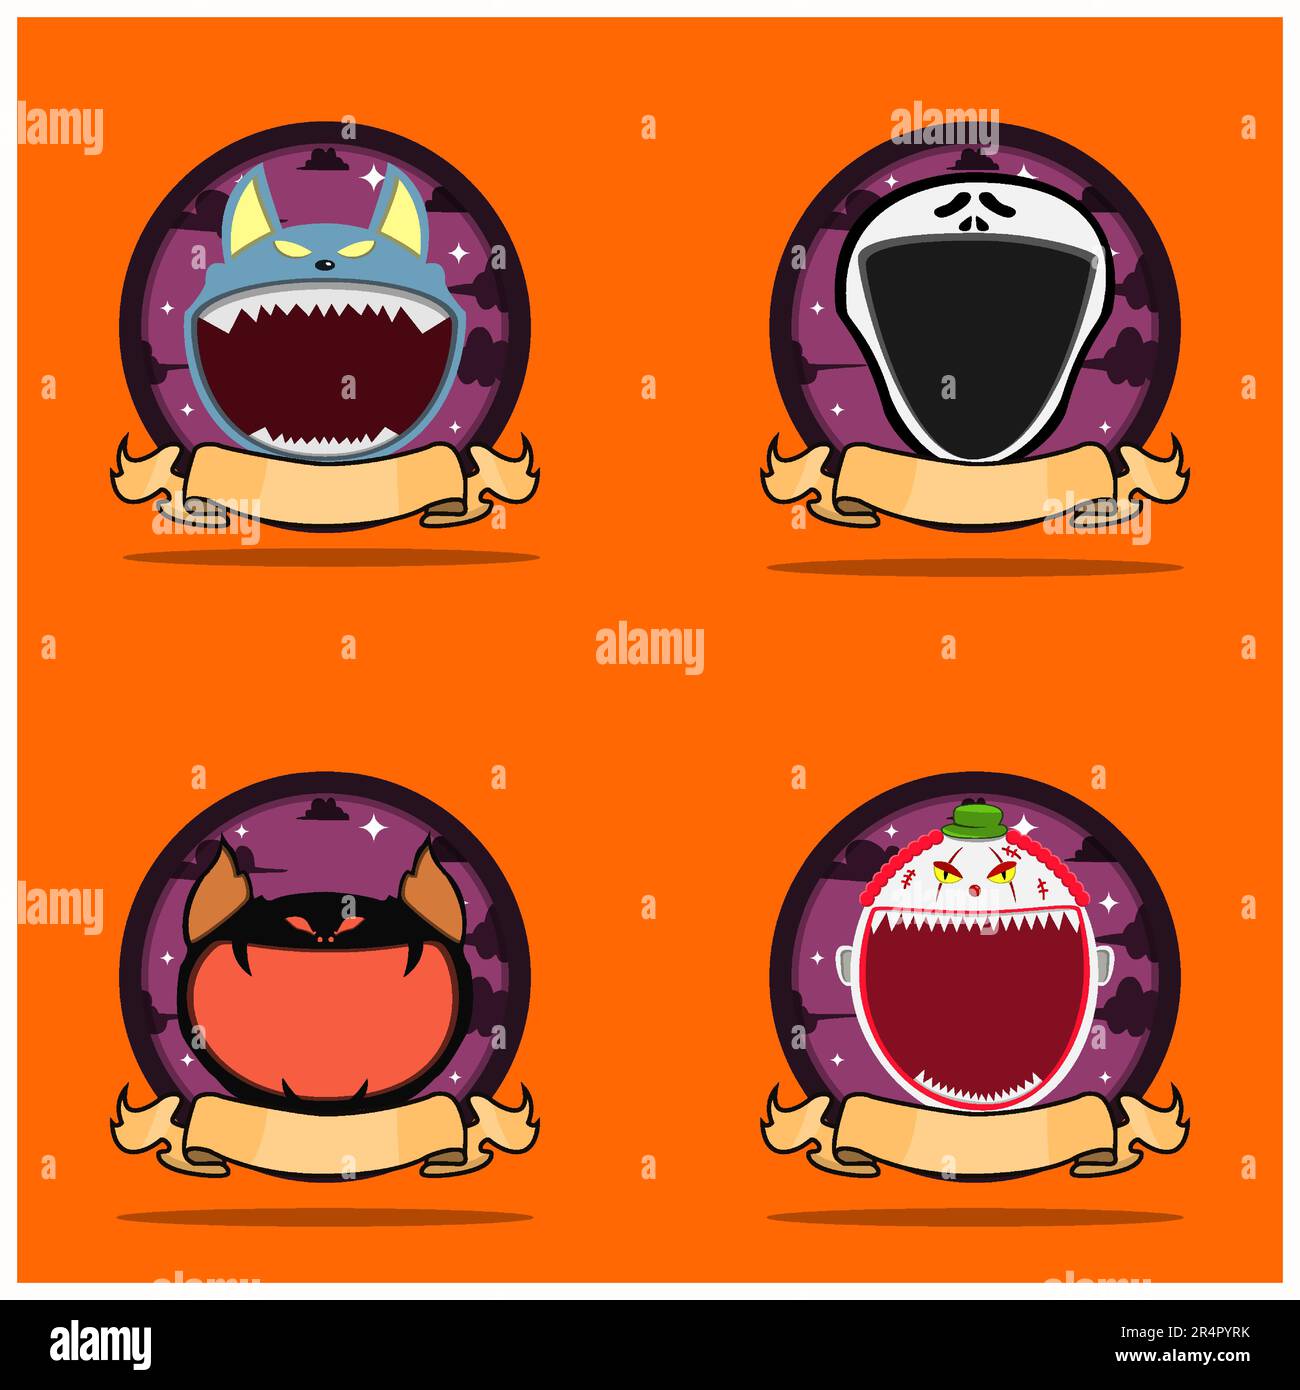 Emblem Set Head Monster. With Wolf, Scream, Creepy Bat and Creepy Clown Head Character Design. Vector And Illustration. Stock Vector